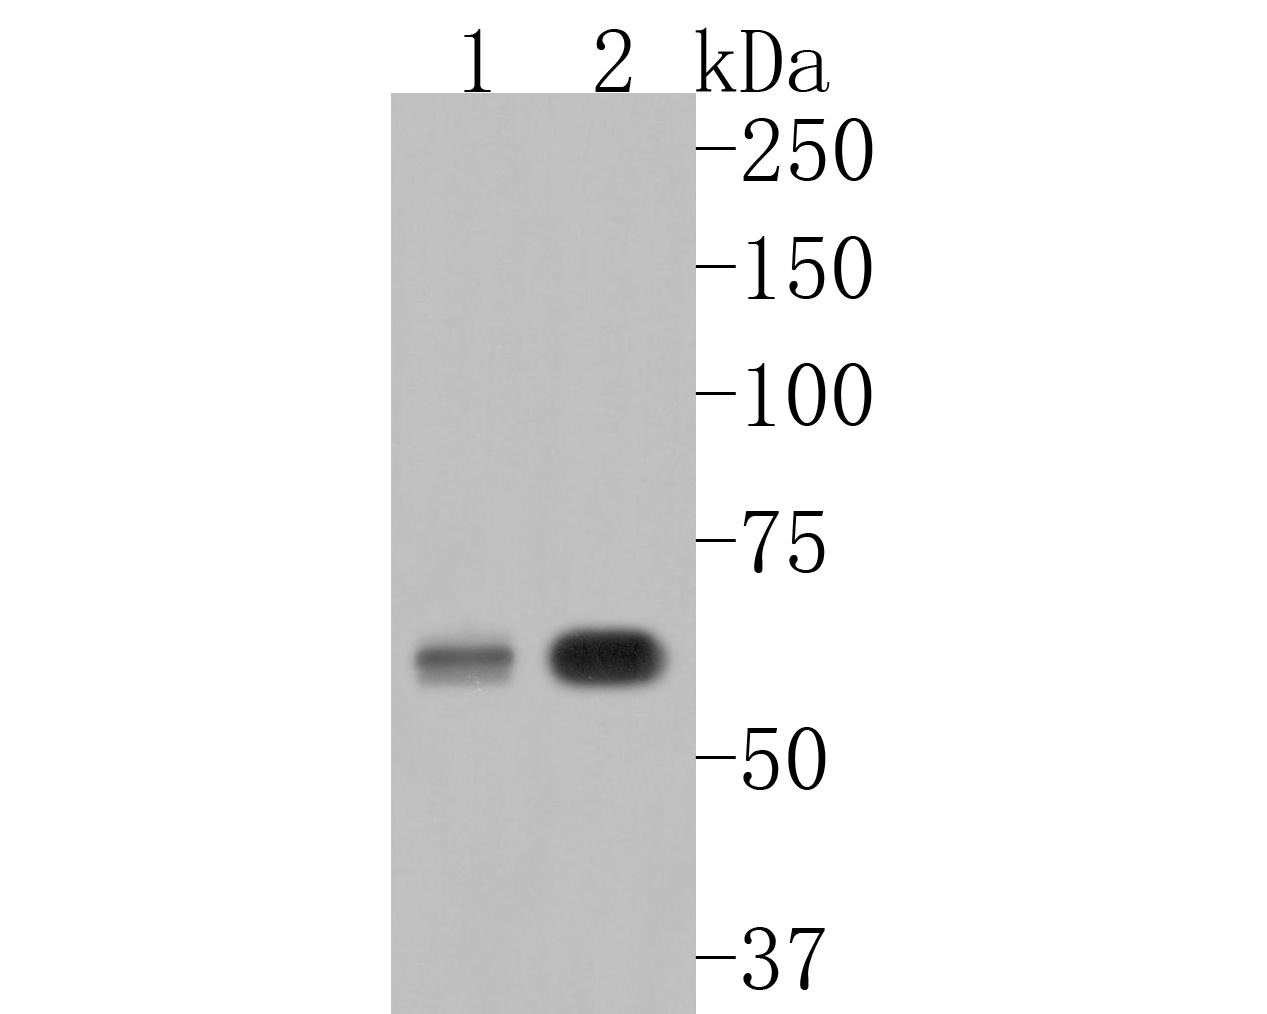 Western blot analysis of PPP3CC on different lysates. Proteins were transferred to a PVDF membrane and blocked with 5% BSA in PBS for 1 hour at room temperature. The primary antibody (HA500101, 1/500) was used in 5% BSA at room temperature for 2 hours. Goat Anti-Rabbit IgG - HRP Secondary Antibody (HA1001) at 1:5,000 dilution was used for 1 hour at room temperature.<br />
Positive control: <br />
Lane 1: HepG2 cell lysate<br />
Lane 2: Mouse hippocampus tissue lysate